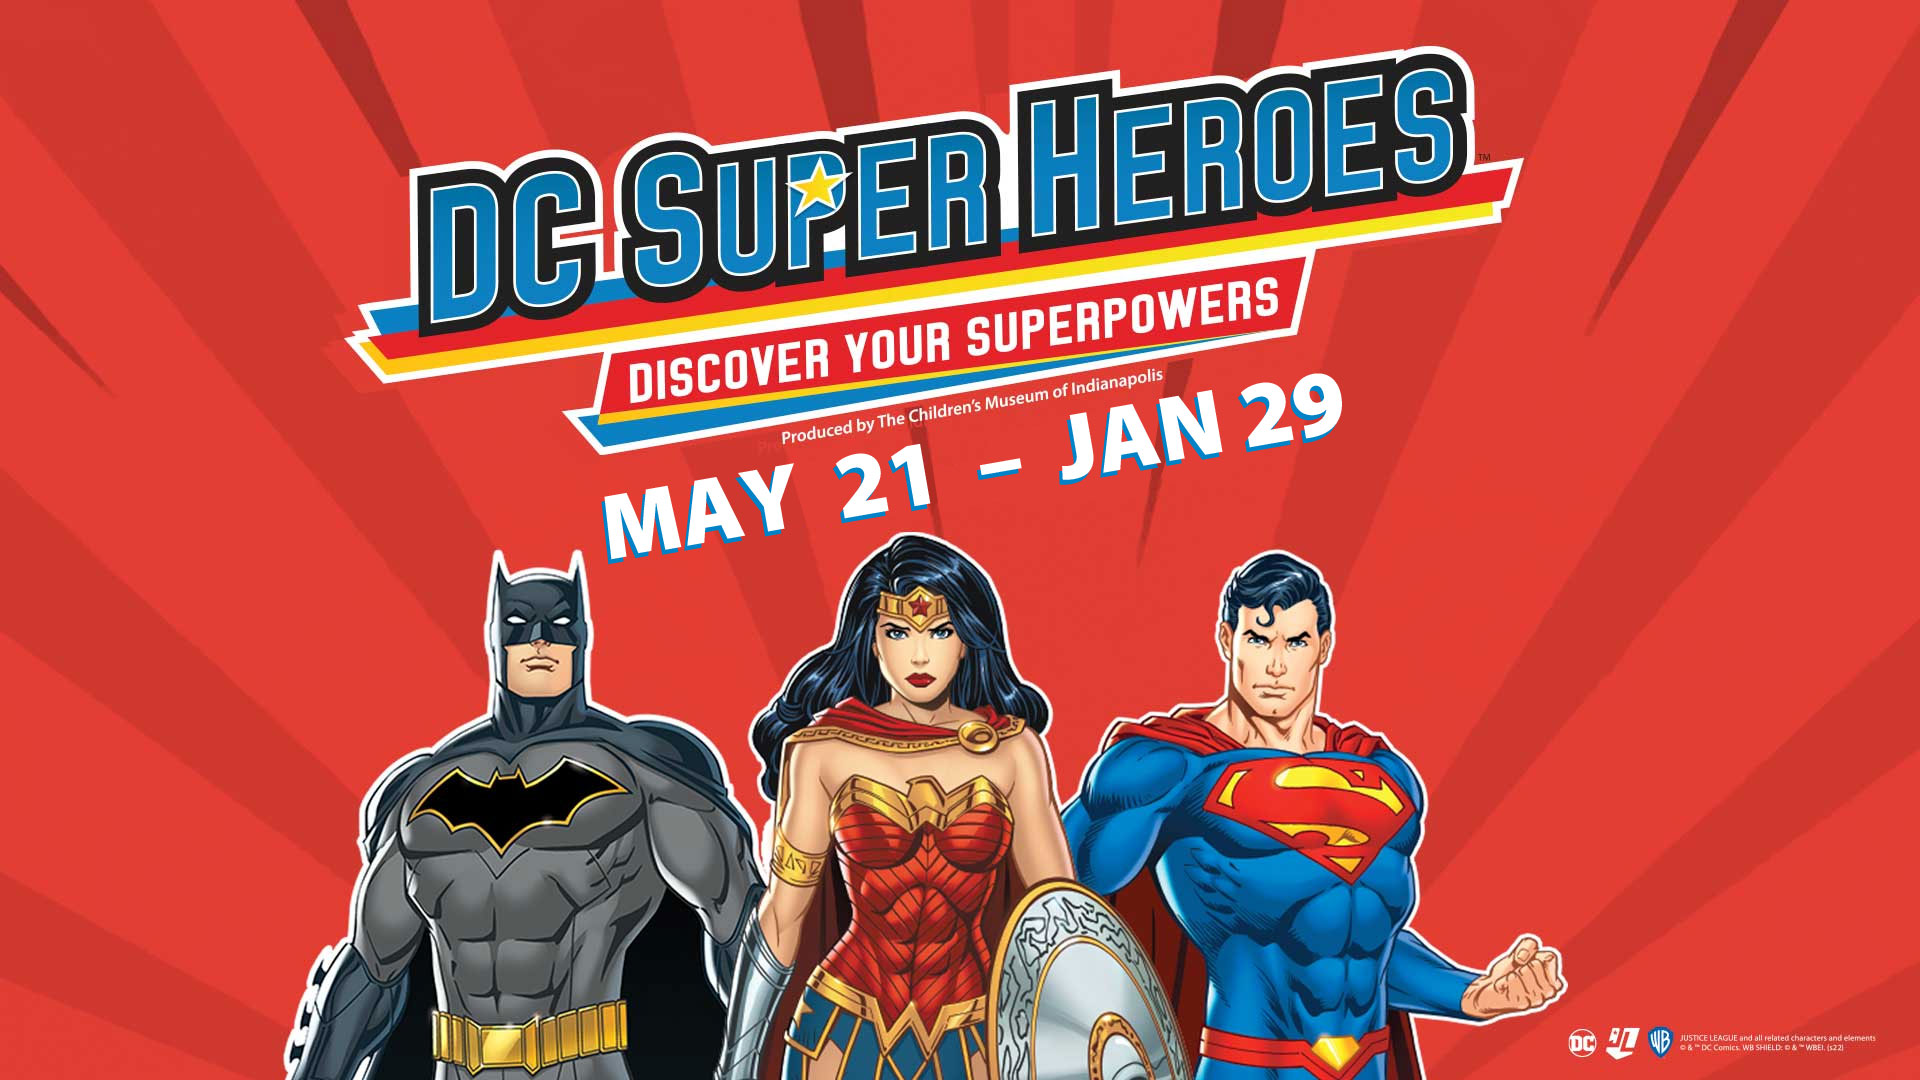 On View: DC Super Heroes: Discover Your Superpowers